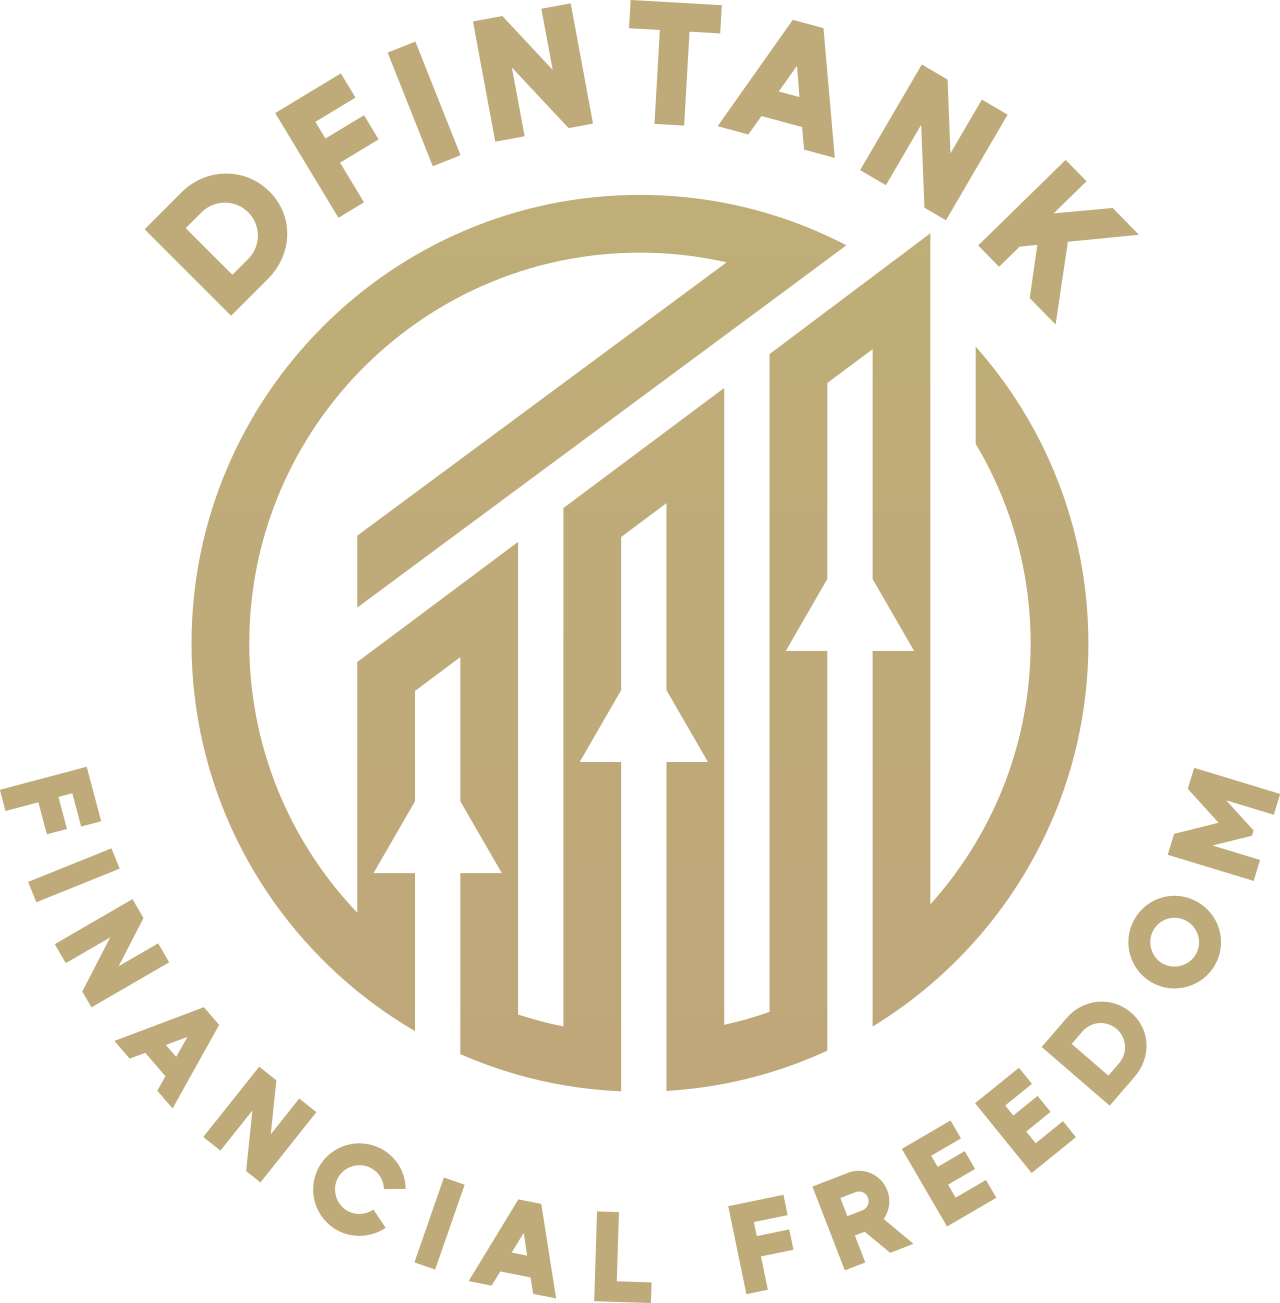 DFinTank's web page